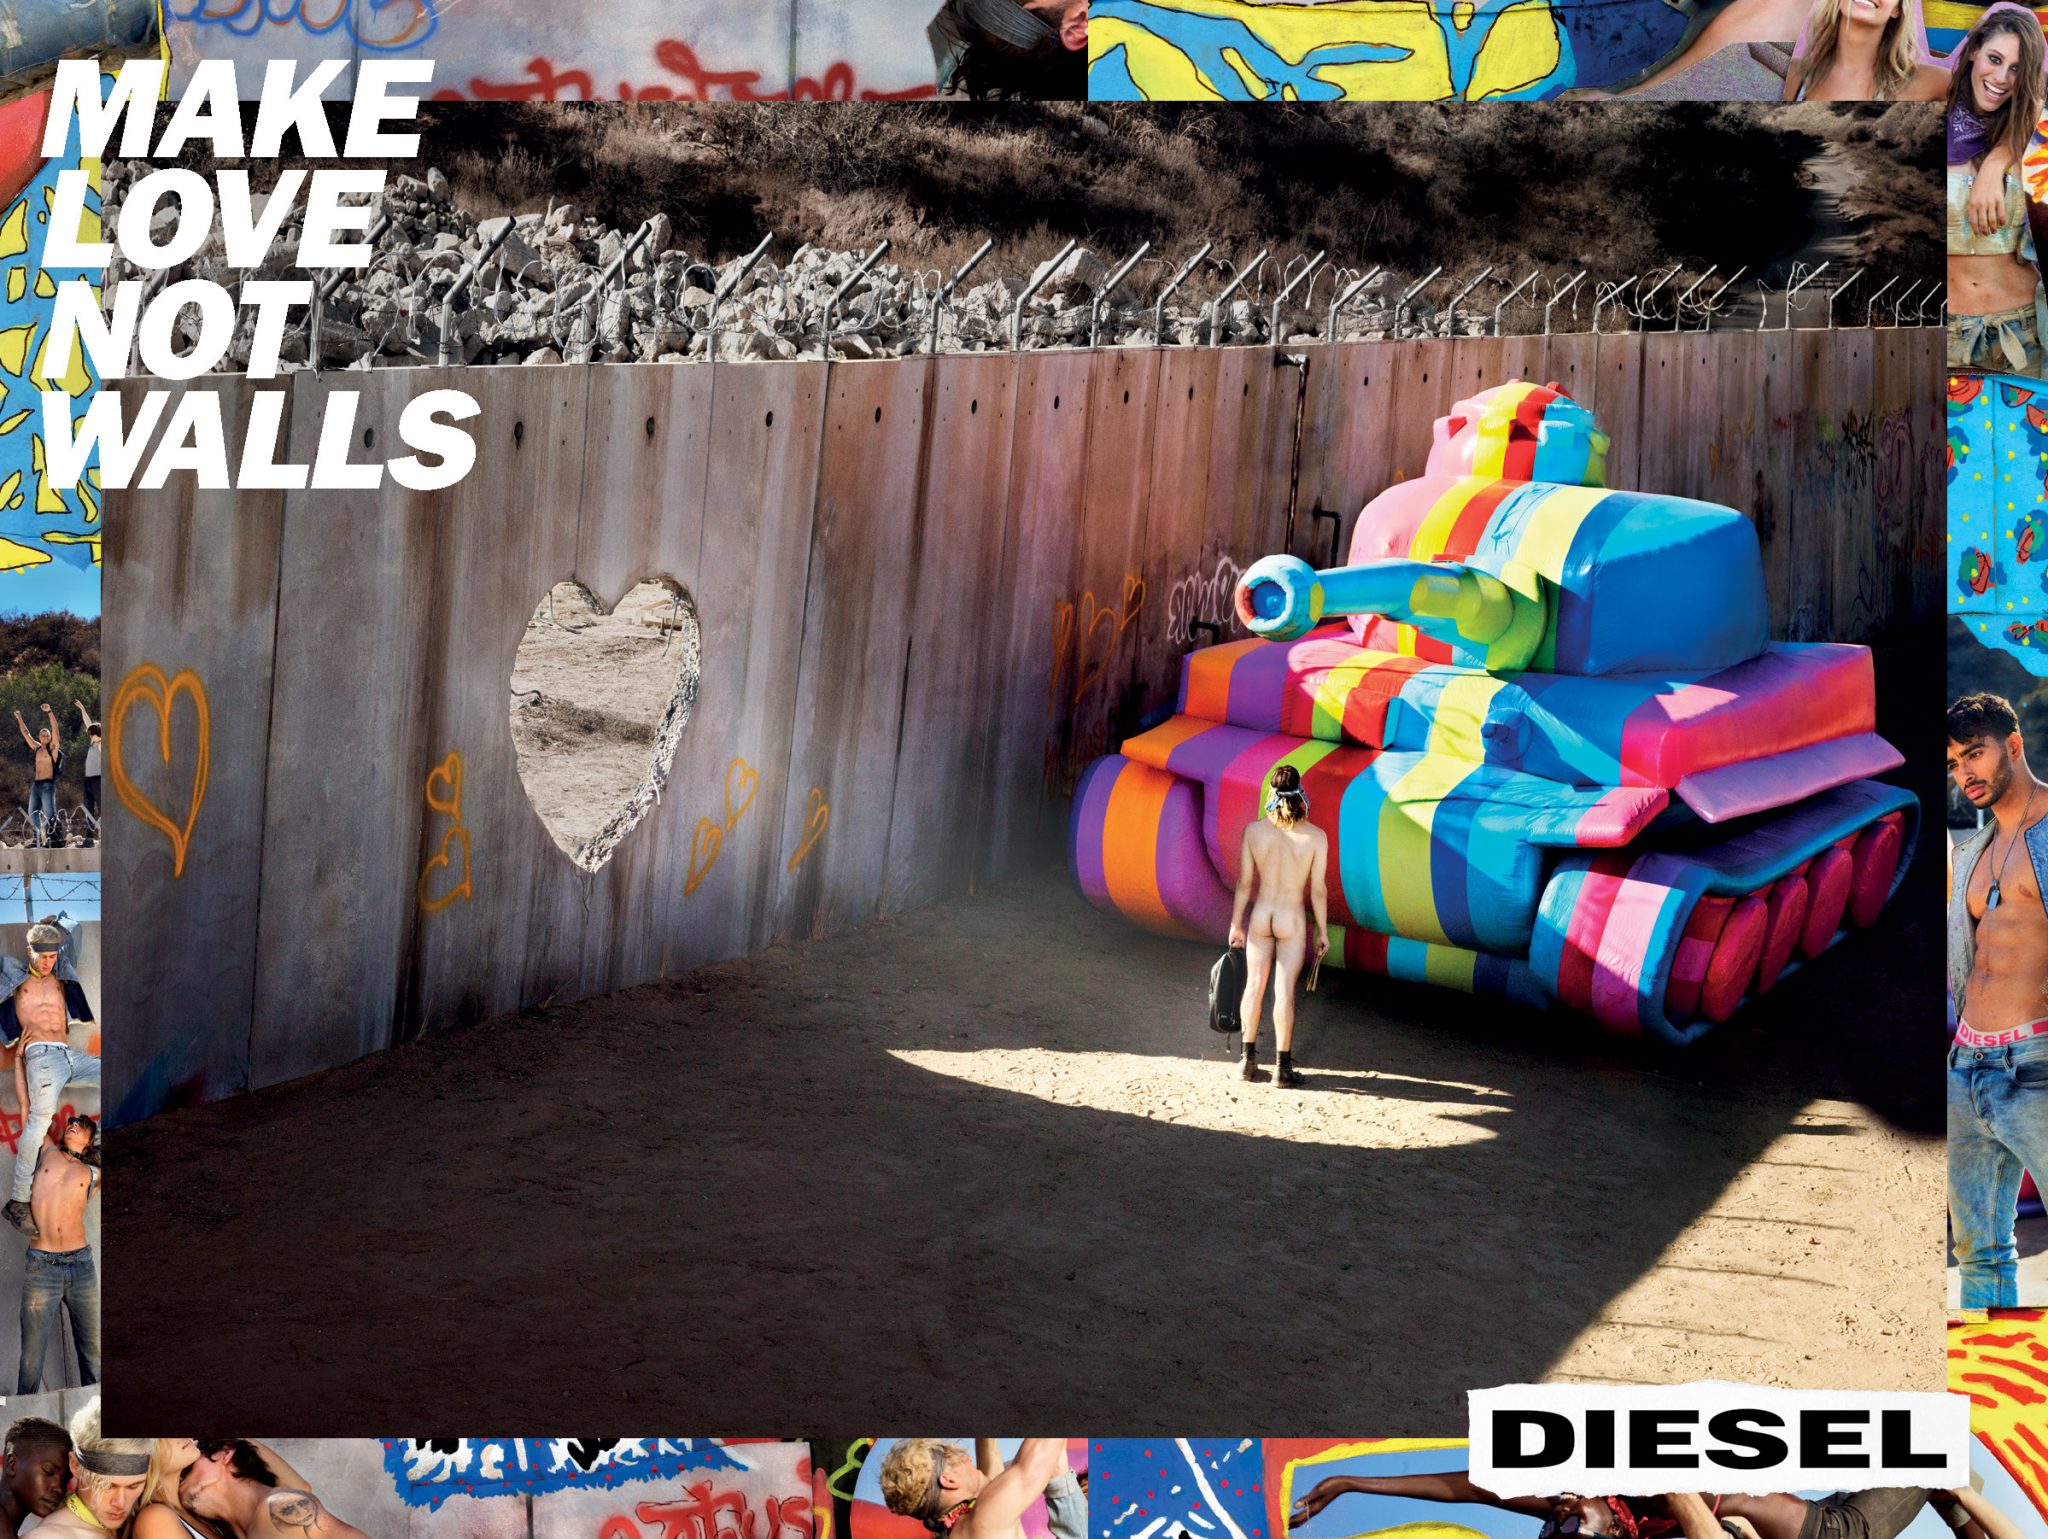 David LaChapelle | Diesel - Make love not walls | The award-winning multidisciplinary campaign launched with photography, a short film, and installations that traveled around the globe, putting forward a timely message that pays tribute to inclusion, love, diversity, and fraternity.
| 11